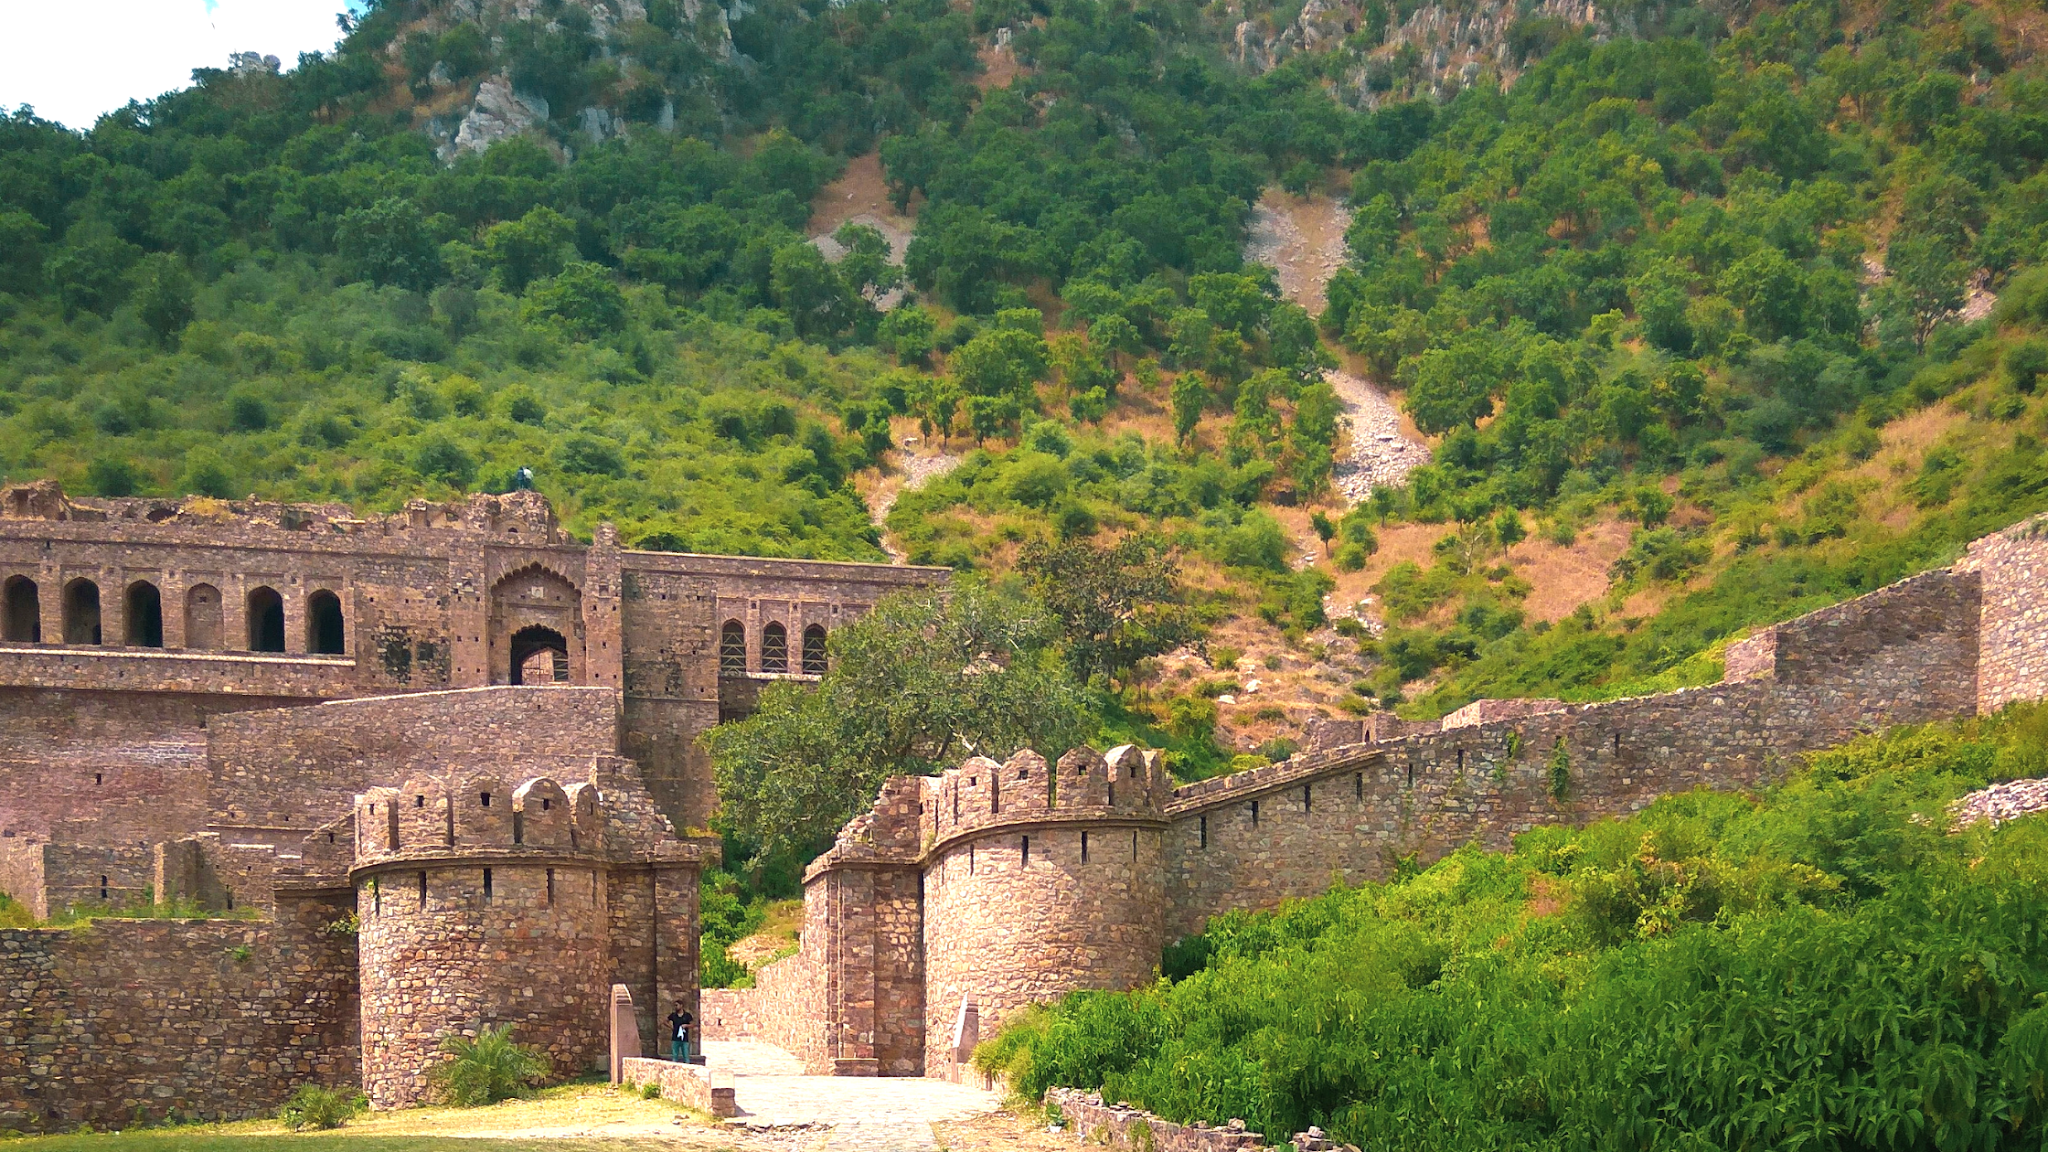 Bhangarh Fort - India's most haunted and scary place